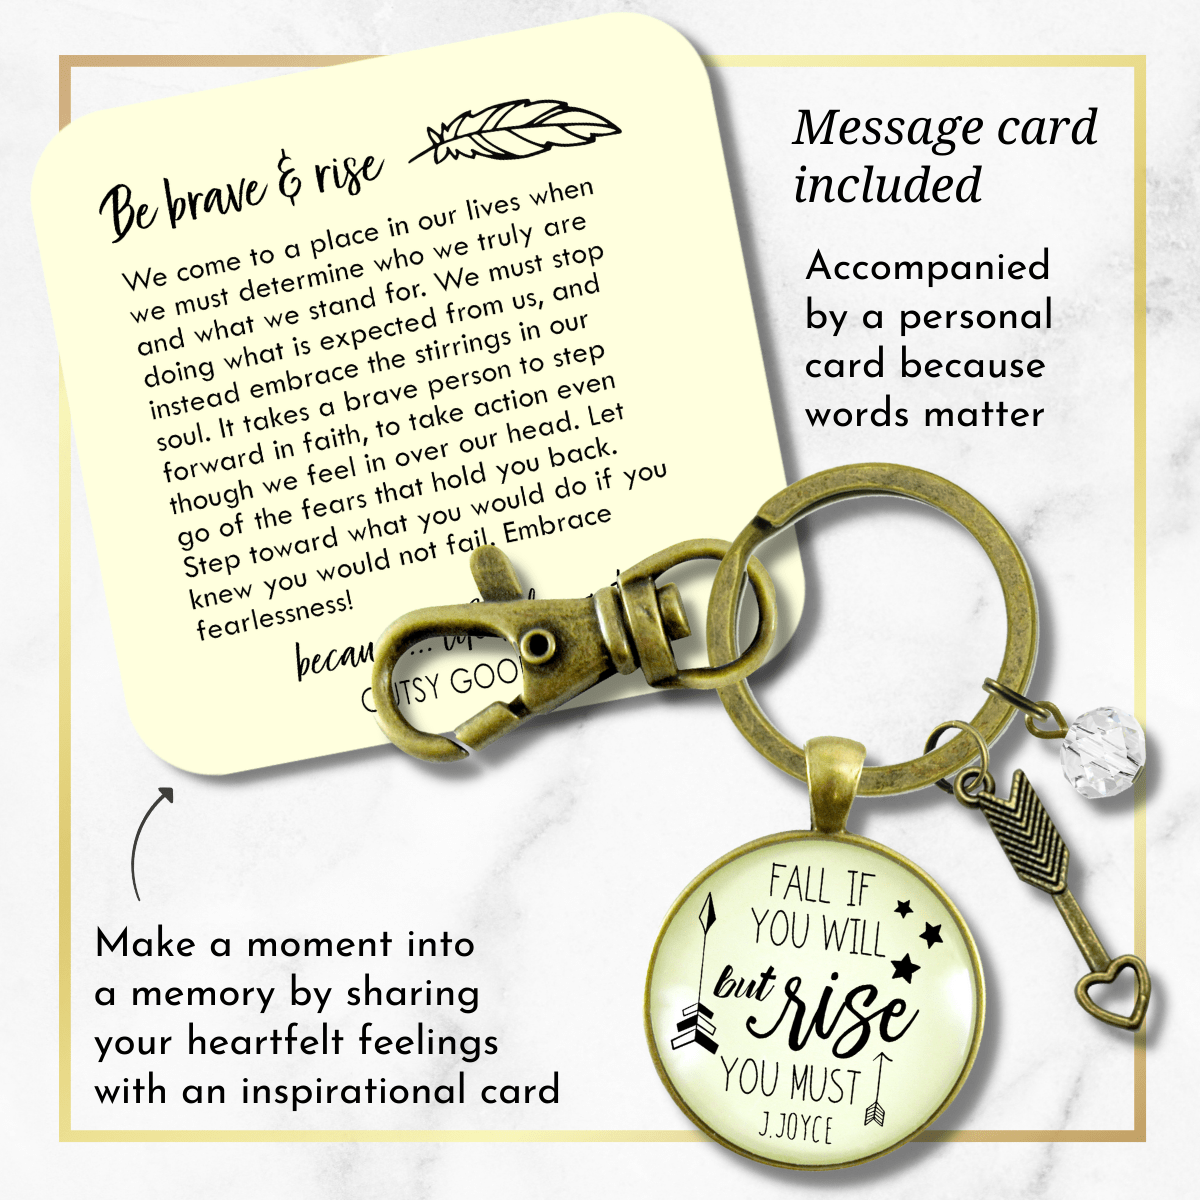 Motivational Keychain Fall If You Will But Rise You Must Quote Jewelry James Joyce Inspire Mantra - Gutsy Goodness Handmade Jewelry;Motivational Keychain Fall If You Will But Rise You Must Quote Jewelry James Joyce Inspire Mantra - Gutsy Goodness Handmade Jewelry Gifts